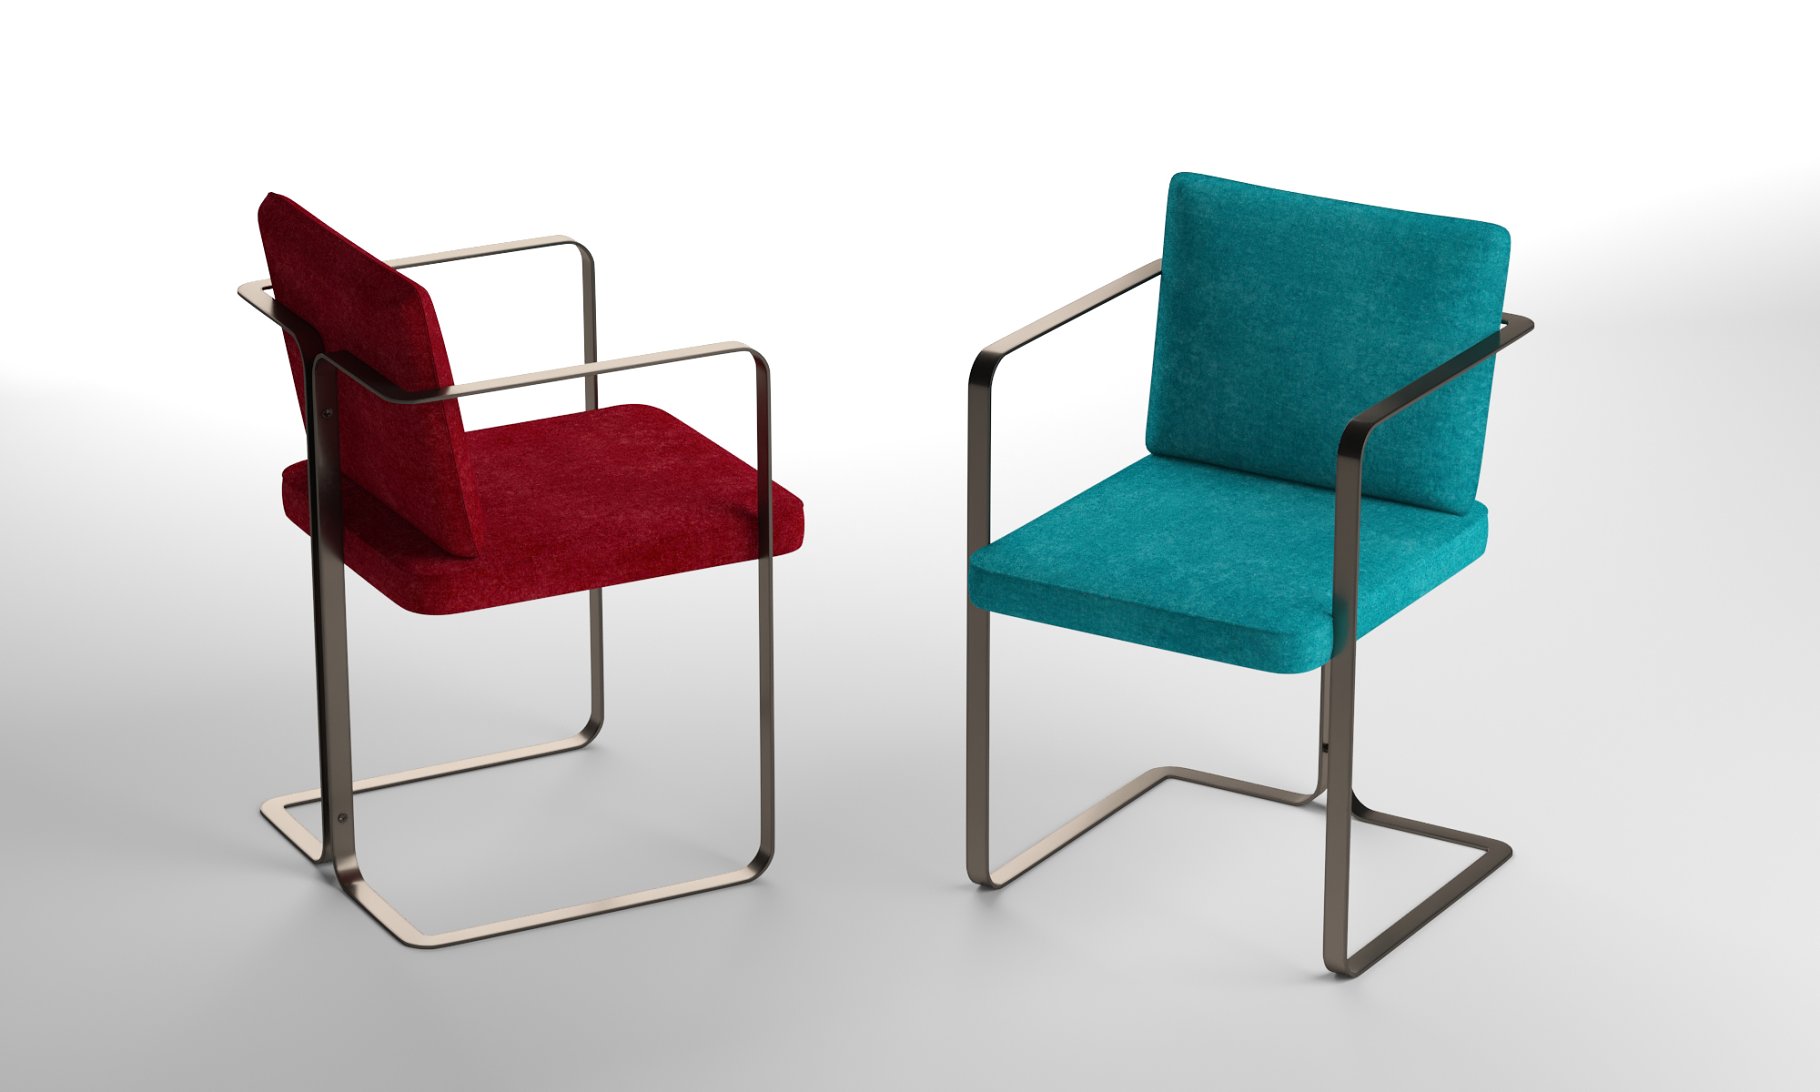 Rendering of an enchanting 3d model of an armchair in two colors